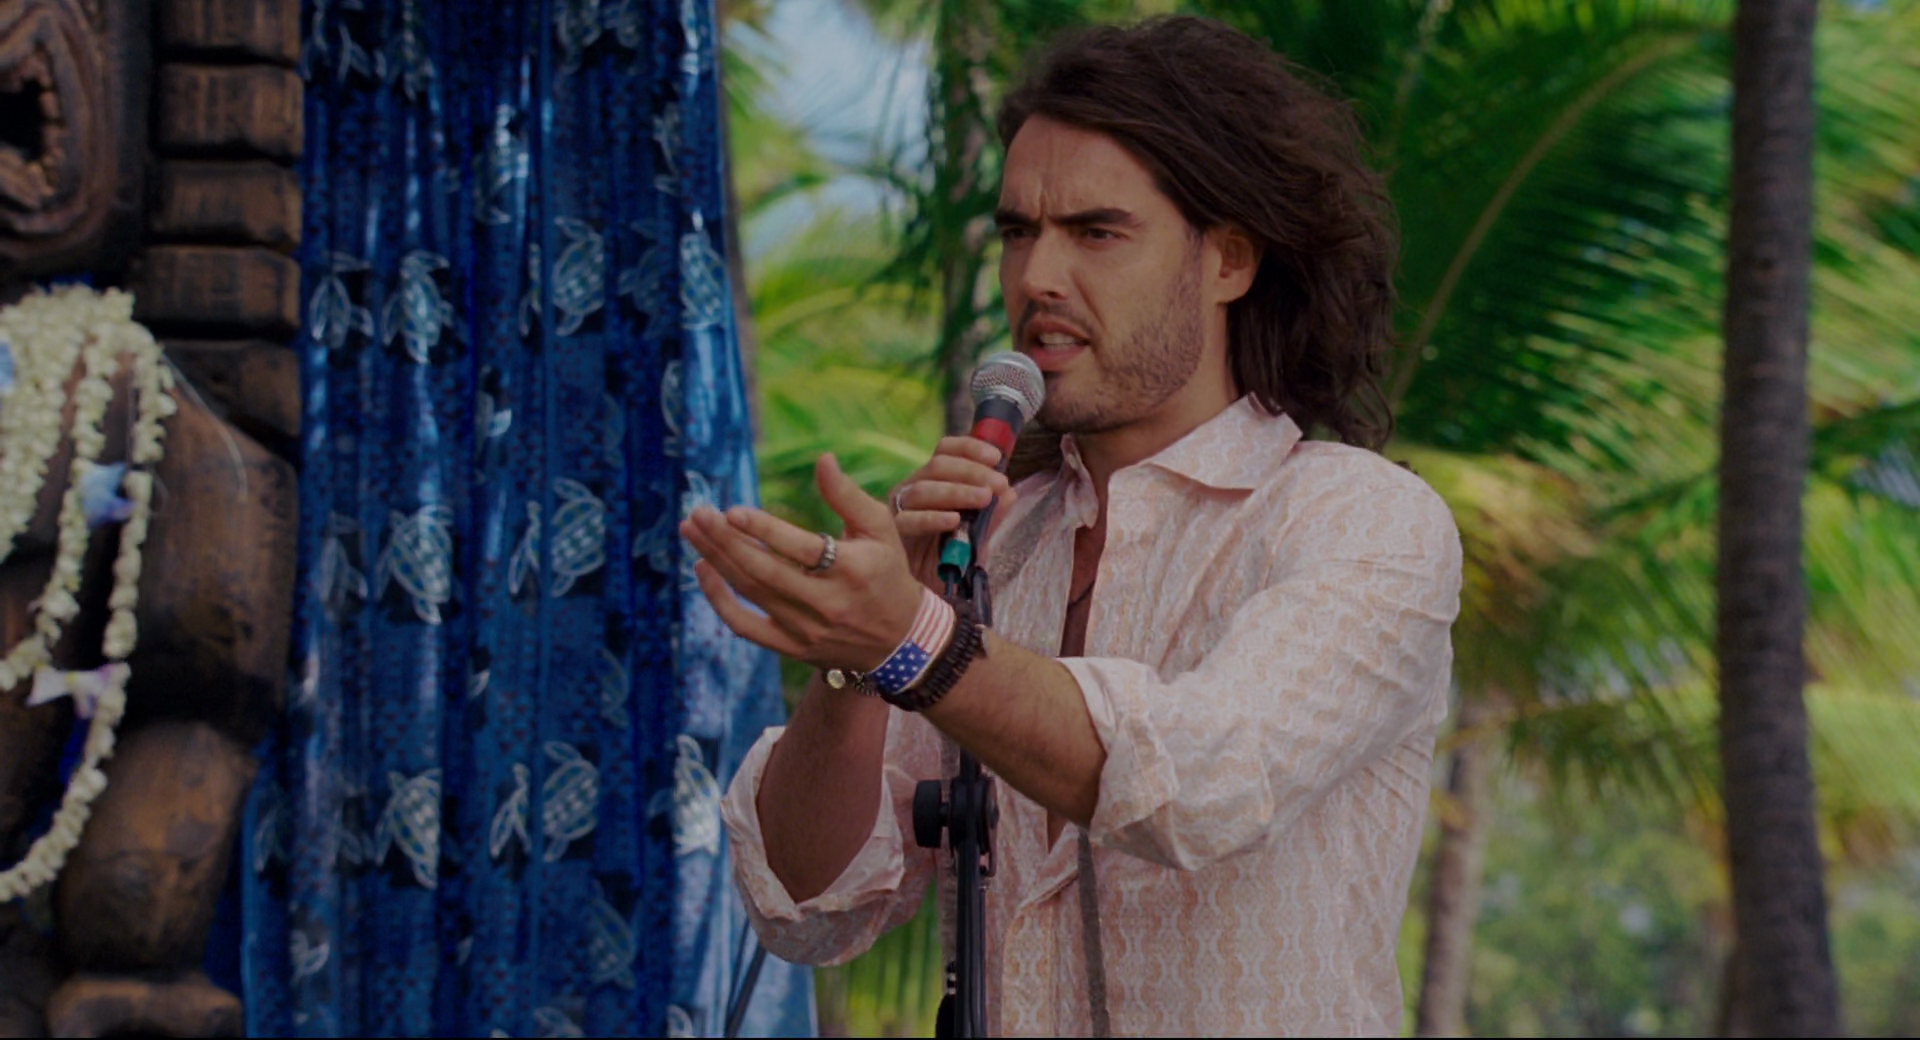 Aldous Snow (Russell Brand) dedicates his song to his new lover in Forgetting Sarah Marshall (2008), Universal Pictures